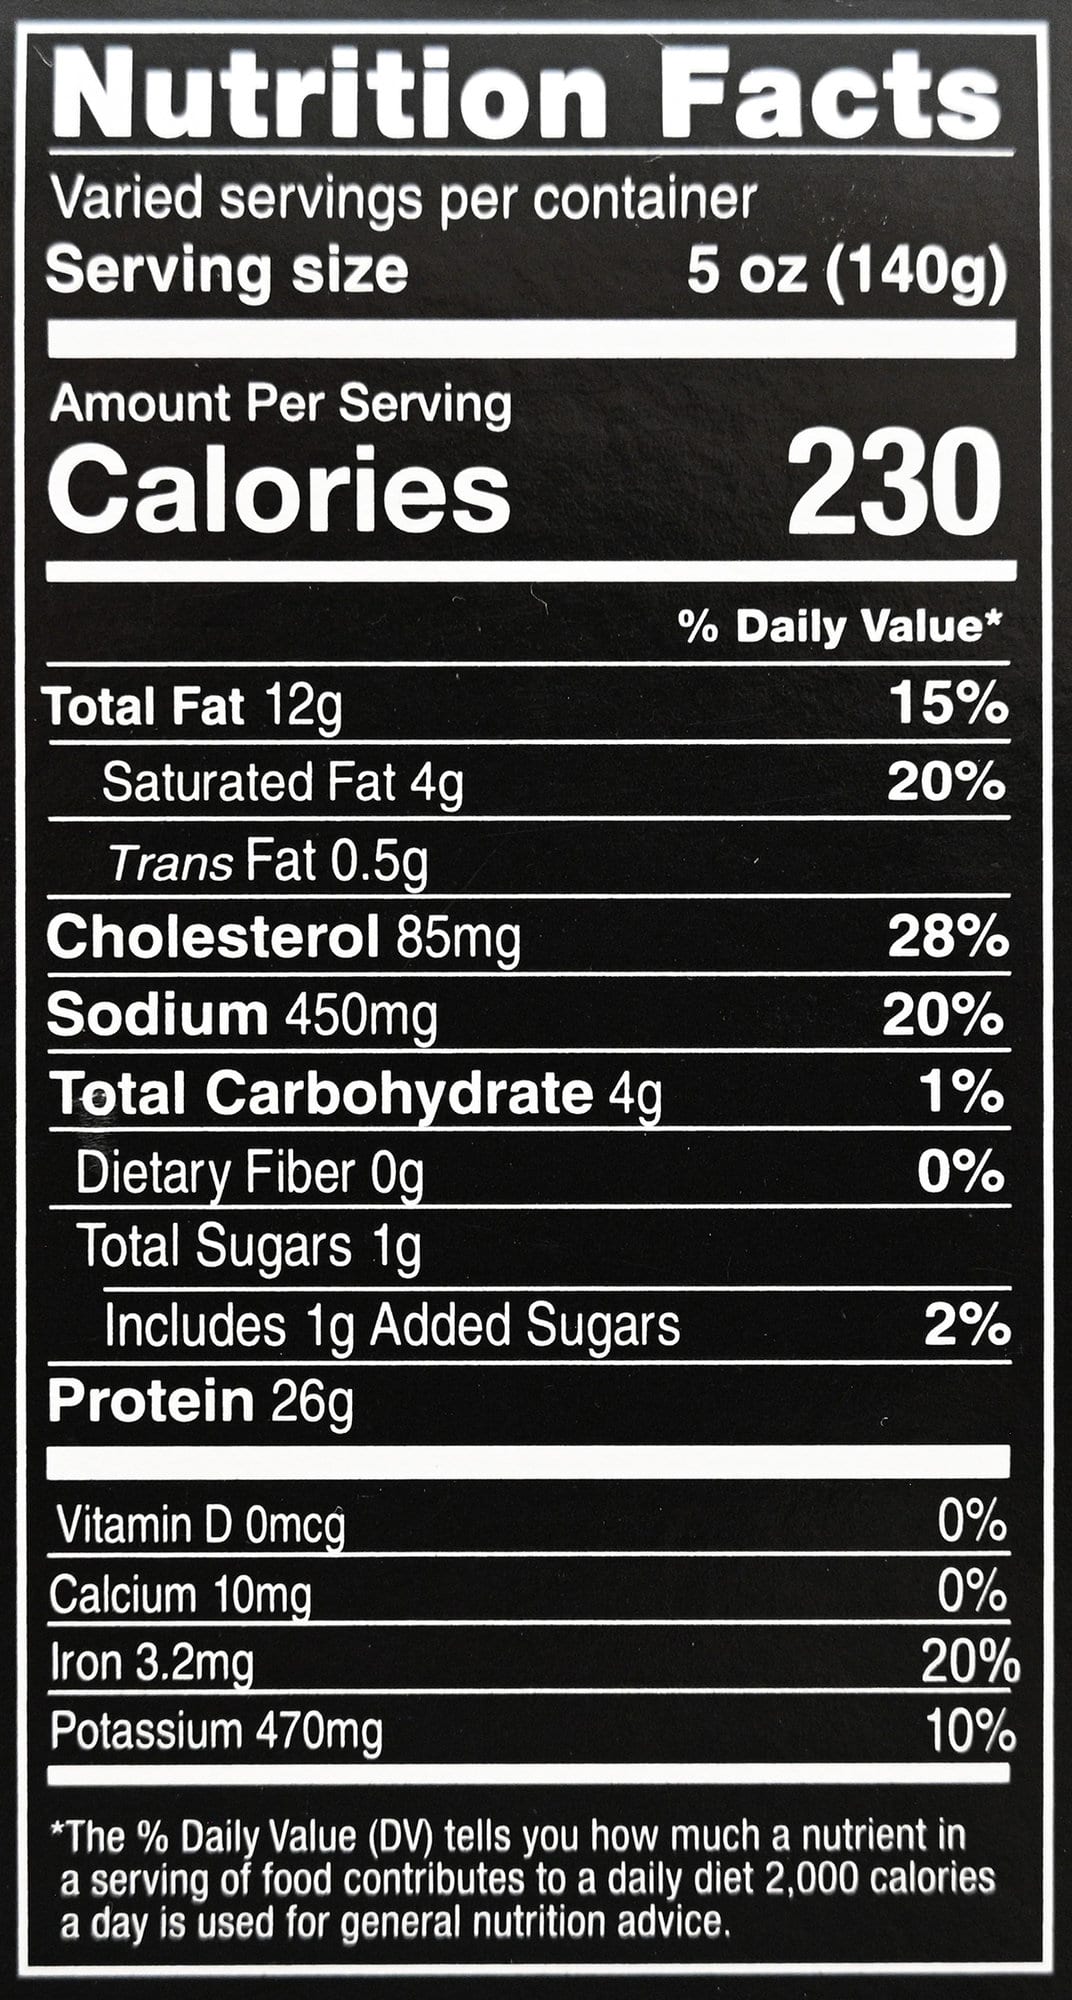 Image of the nutrition facts for the beef pot roast from the back of the package.